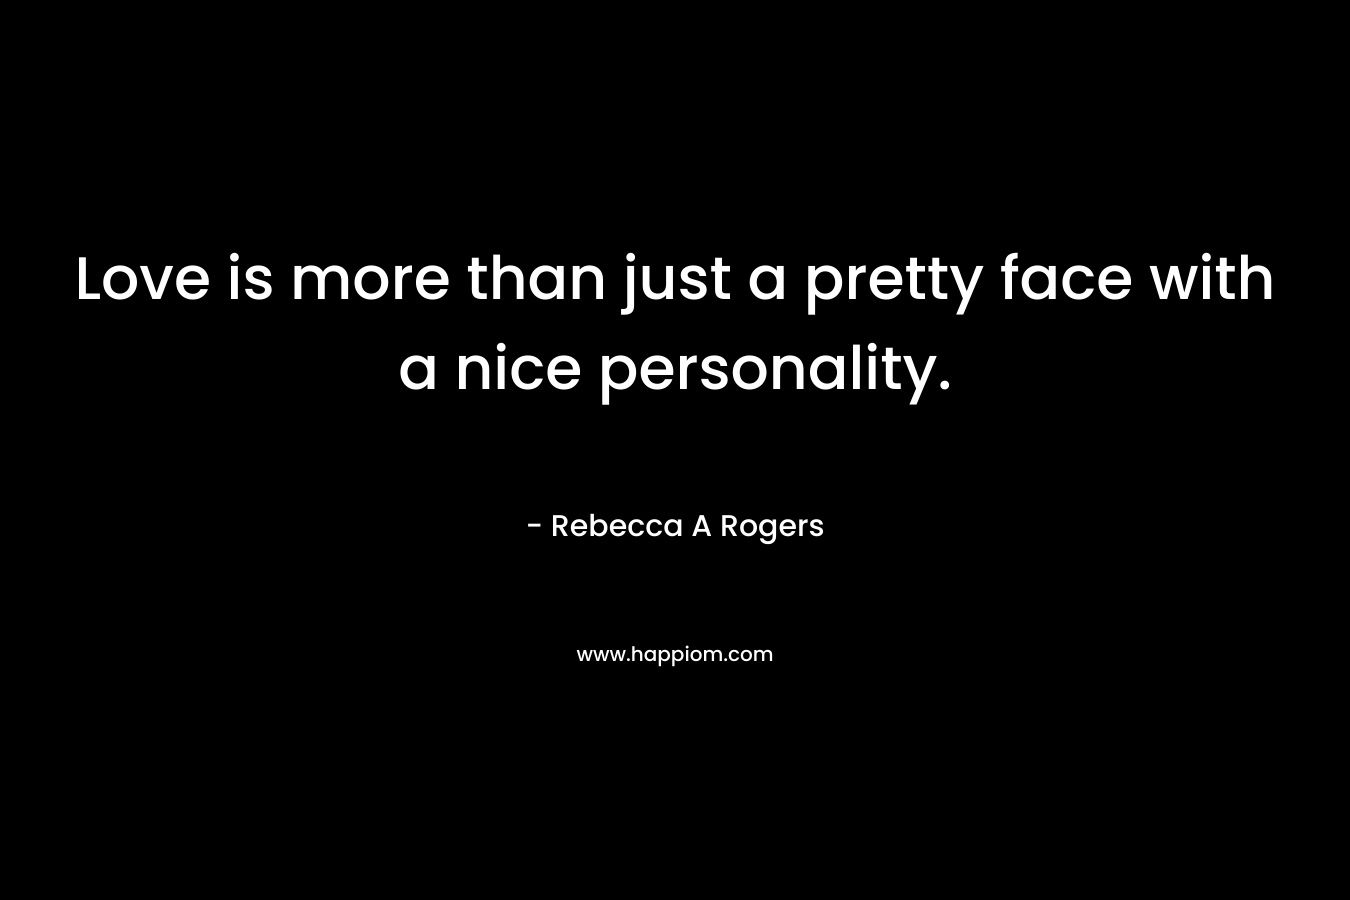 Love is more than just a pretty face with a nice personality. – Rebecca A Rogers